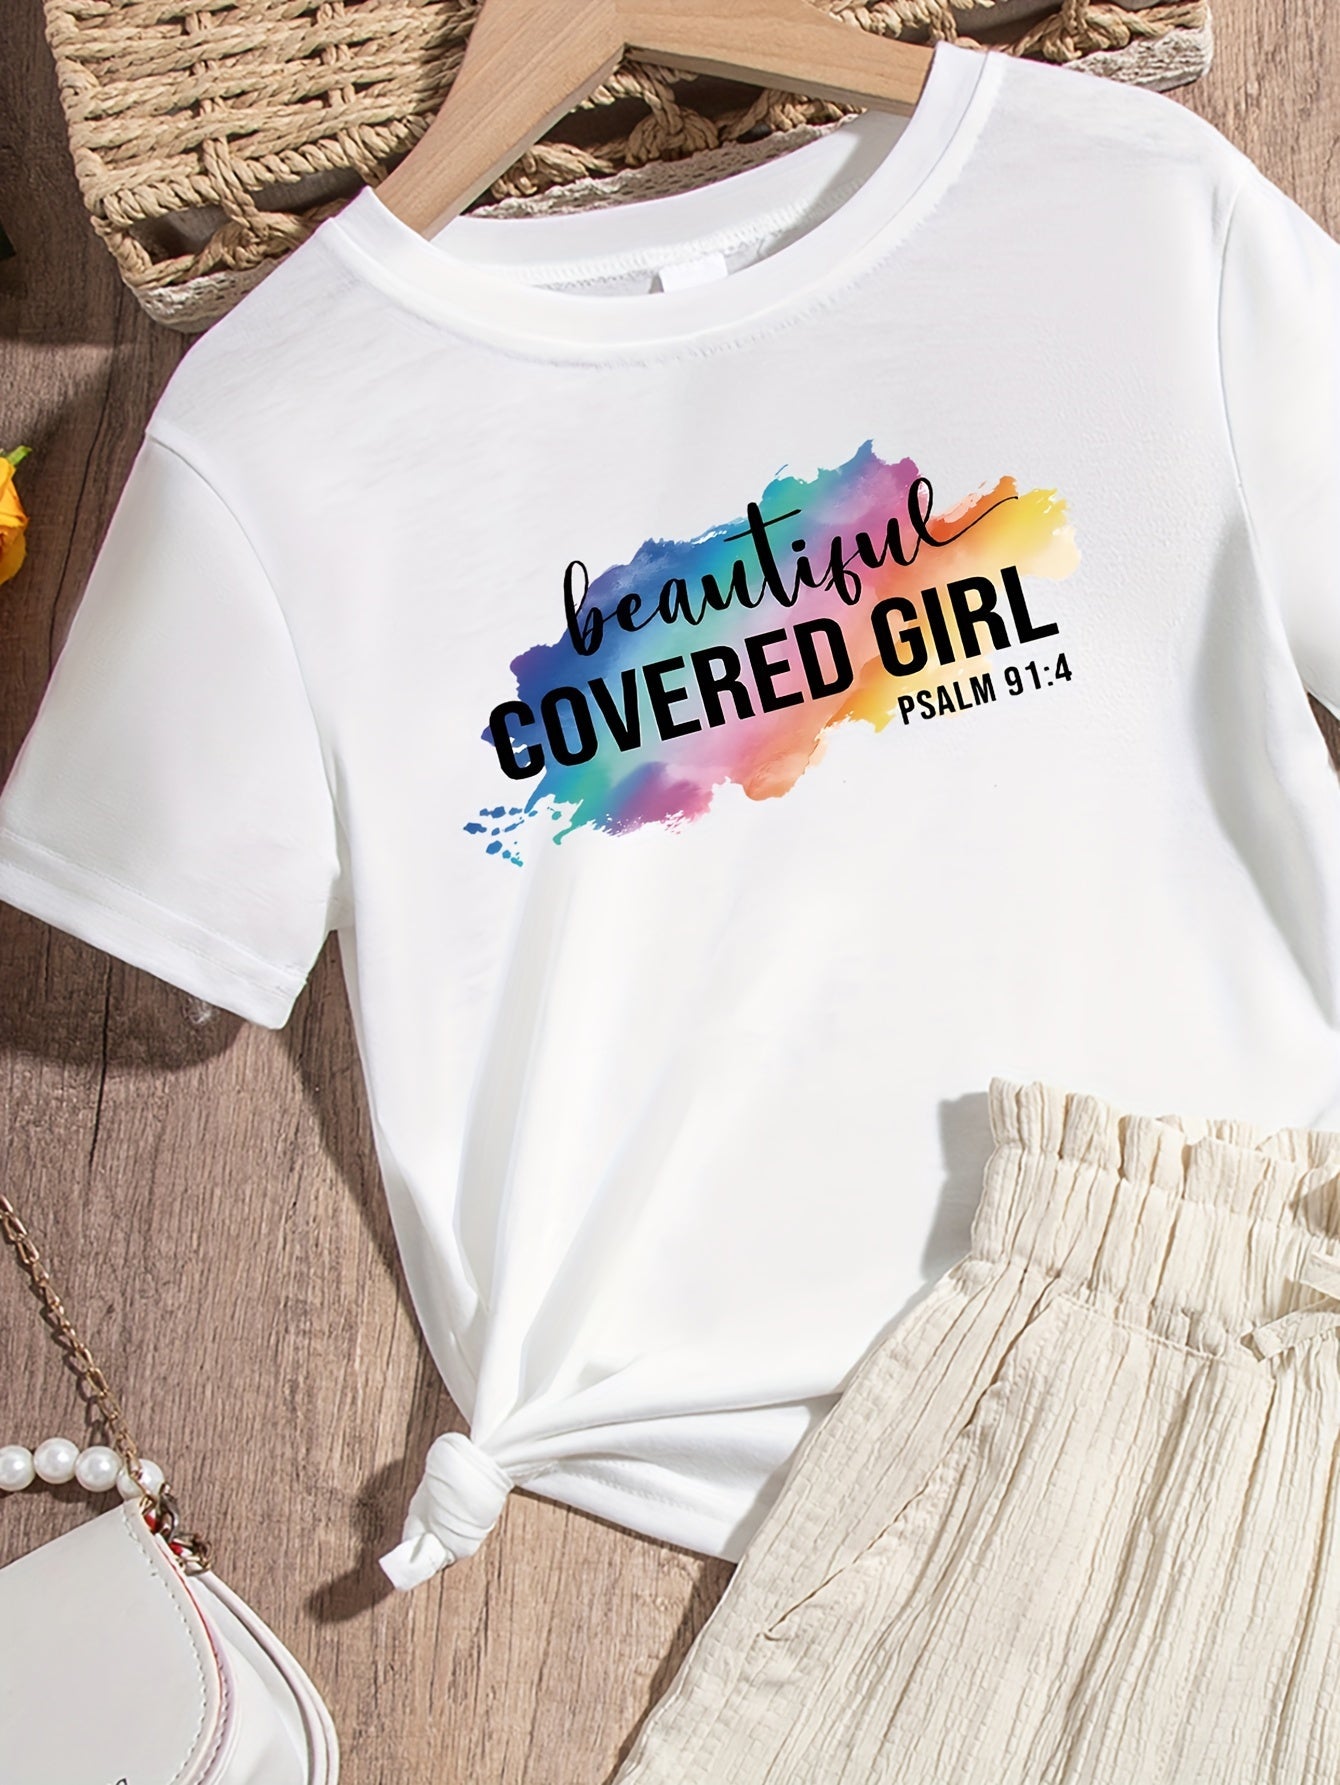 PSALM 91:4 BEAUTIFUL COVERED GIRL Youth Christian Casual Outfit claimedbygoddesigns